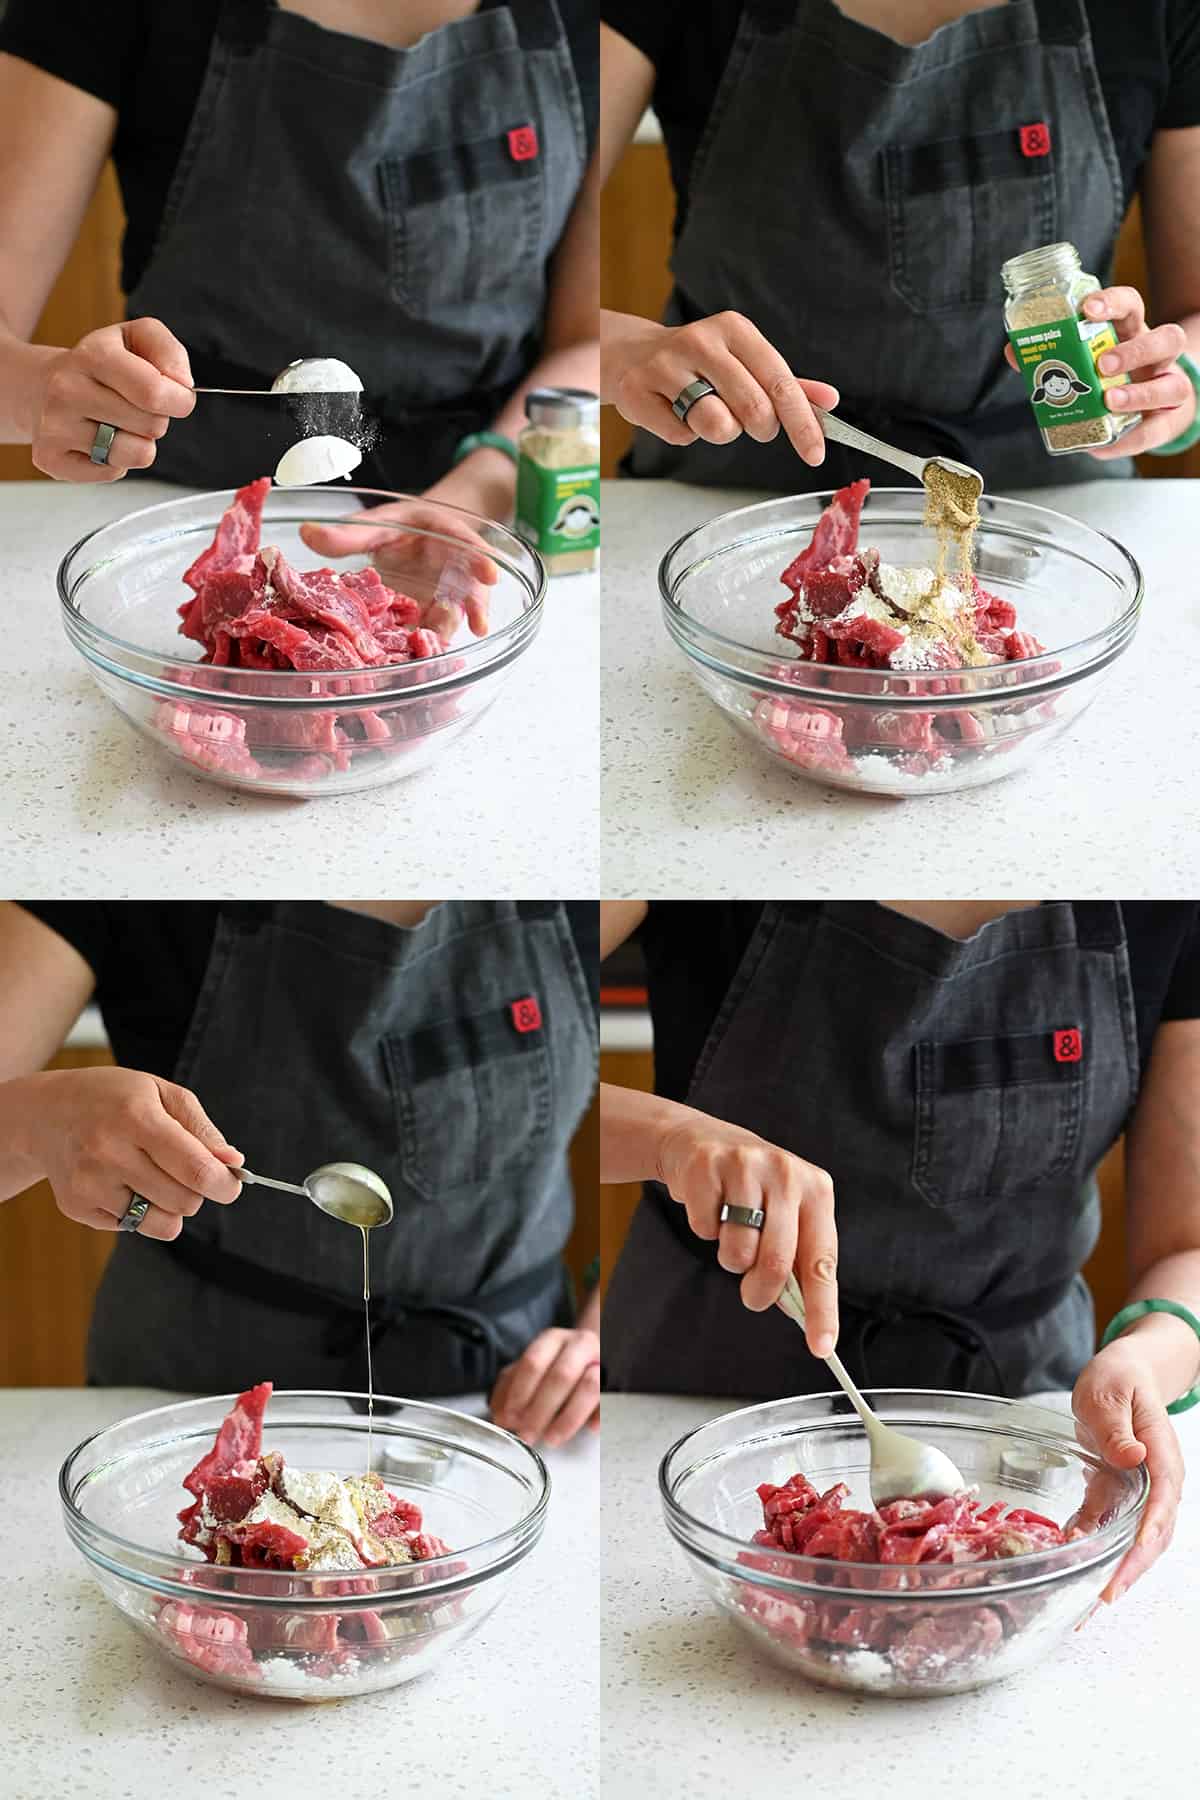 Four sequential shots that show someone adding arrowroot powder, Umami Stir Fry powder, and avocado oil to a bowl of thinly sliced raw flank steak.